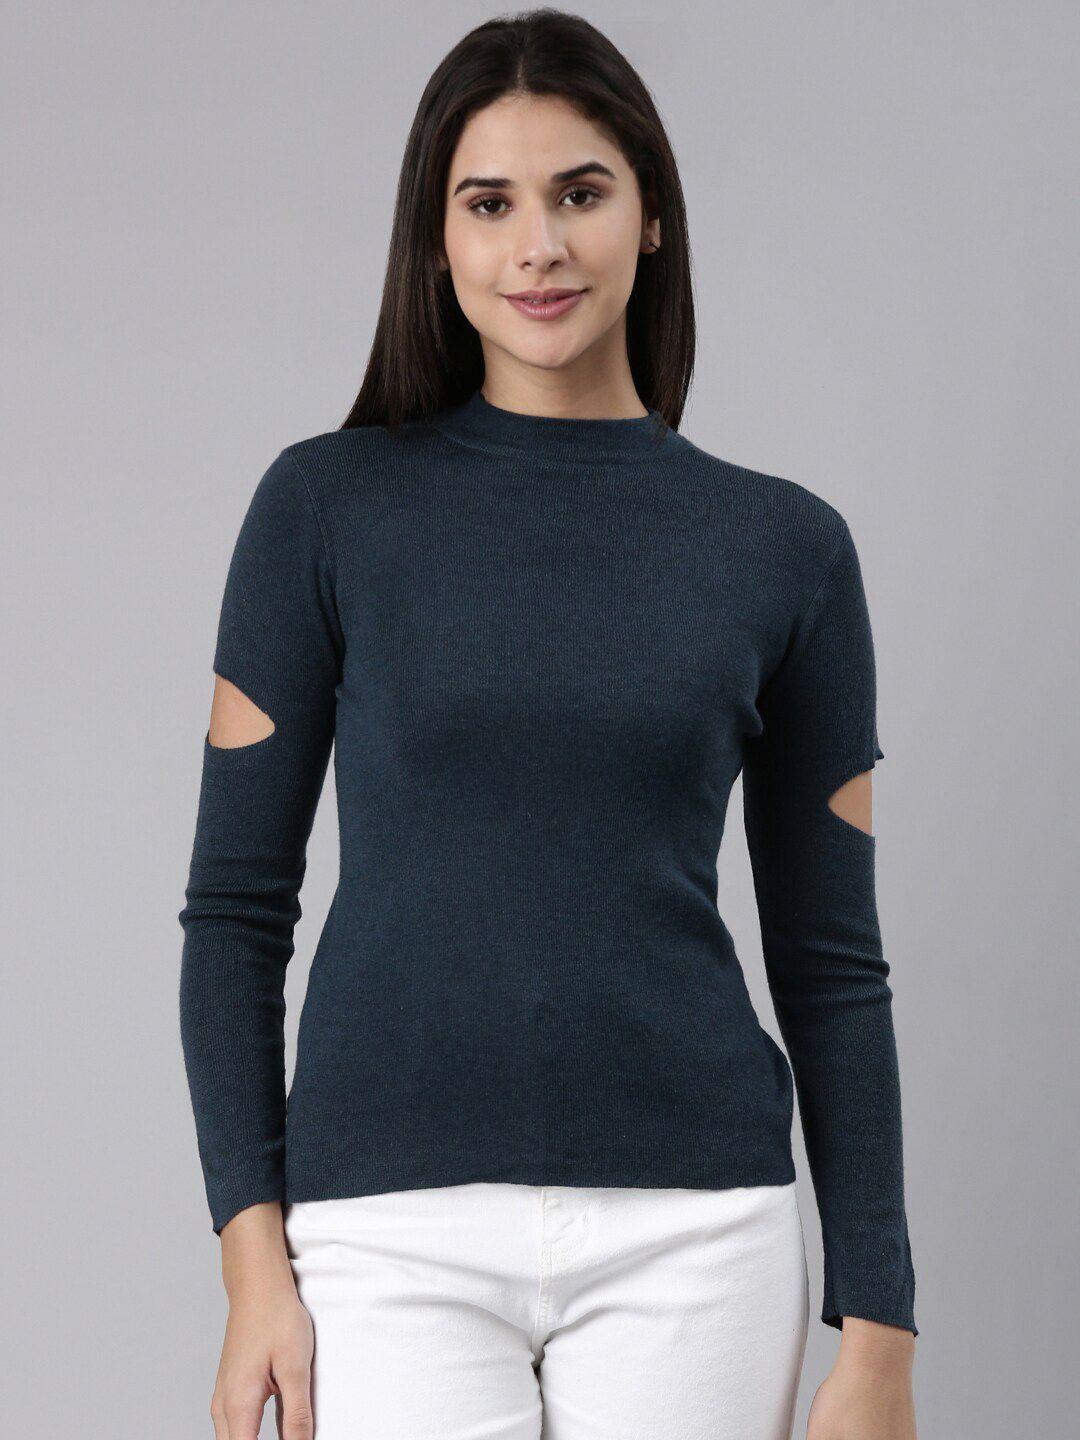 showoff high neck long sleeve cut out fitted top